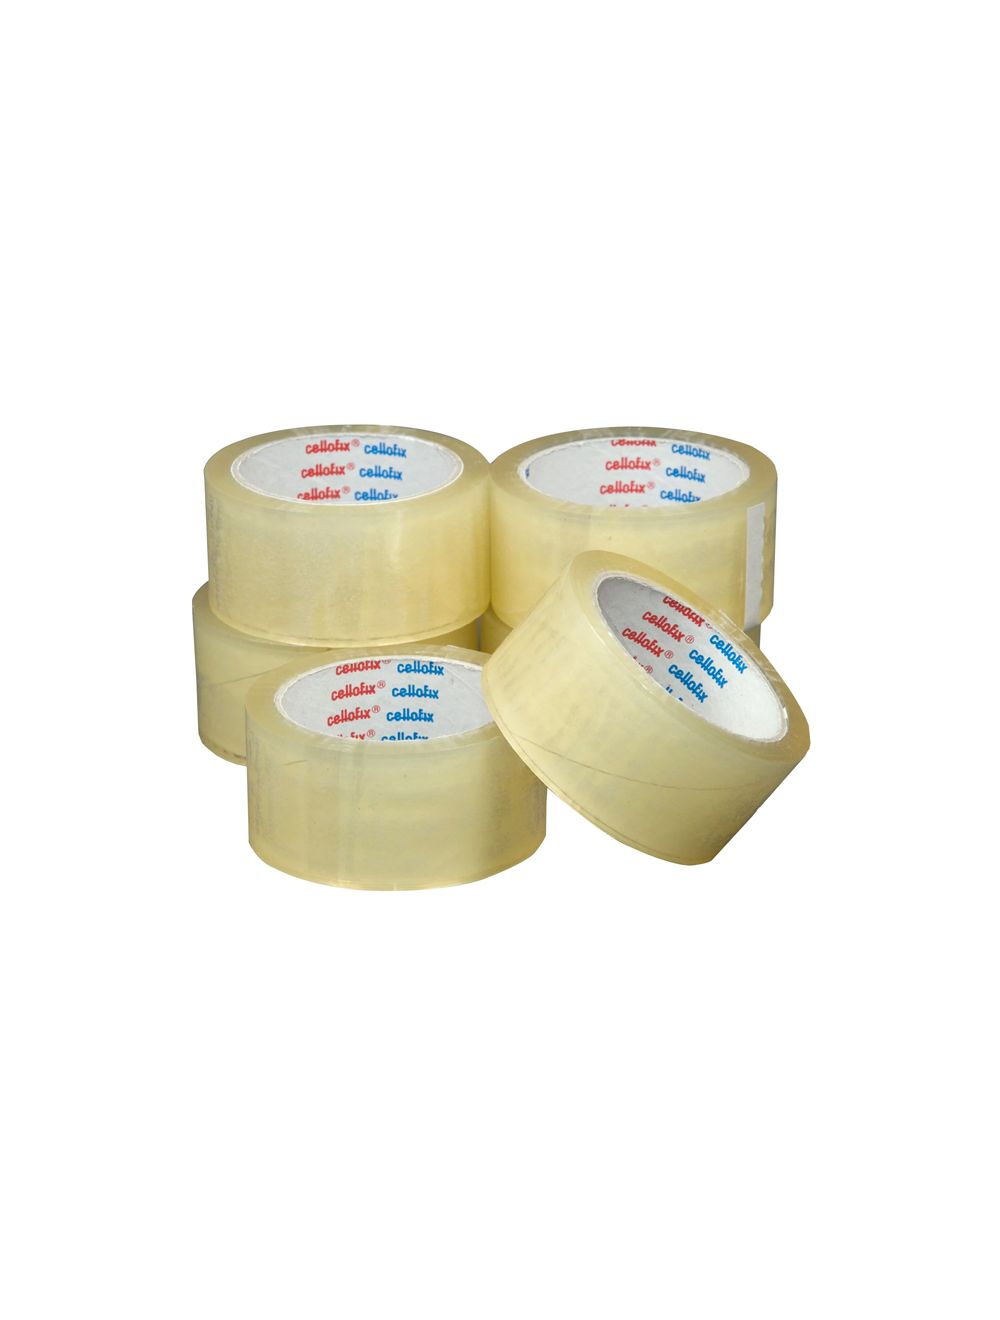 10 ROLLS CLEAR PARCEL CARTON SEALING PACKING REMOVAL selotape TAPE 2"48MM X 66M 